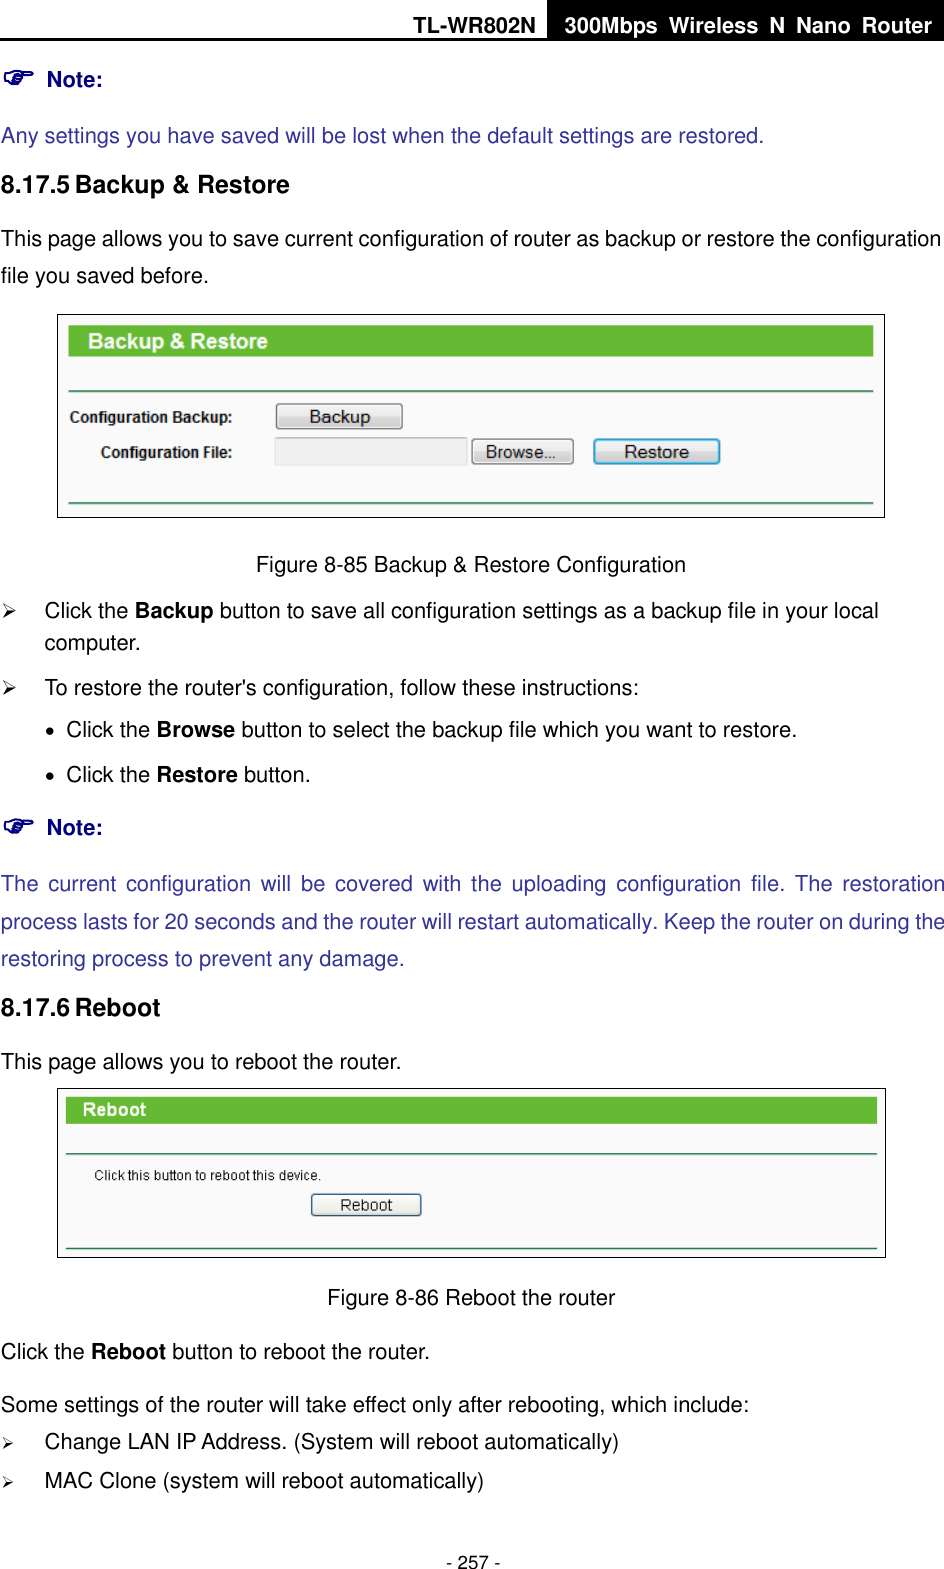 TL-WR802N 300Mbps  Wireless  N  Nano  Router  - 257 -  Note: Any settings you have saved will be lost when the default settings are restored. 8.17.5 Backup &amp; Restore This page allows you to save current configuration of router as backup or restore the configuration file you saved before.  Figure 8-85 Backup &amp; Restore Configuration  Click the Backup button to save all configuration settings as a backup file in your local computer.    To restore the router&apos;s configuration, follow these instructions:  Click the Browse button to select the backup file which you want to restore.    Click the Restore button.    Note: The  current configuration  will  be  covered with  the  uploading configuration file.  The  restoration process lasts for 20 seconds and the router will restart automatically. Keep the router on during the restoring process to prevent any damage. 8.17.6 Reboot This page allows you to reboot the router.  Figure 8-86 Reboot the router Click the Reboot button to reboot the router. Some settings of the router will take effect only after rebooting, which include:  Change LAN IP Address. (System will reboot automatically)  MAC Clone (system will reboot automatically) 